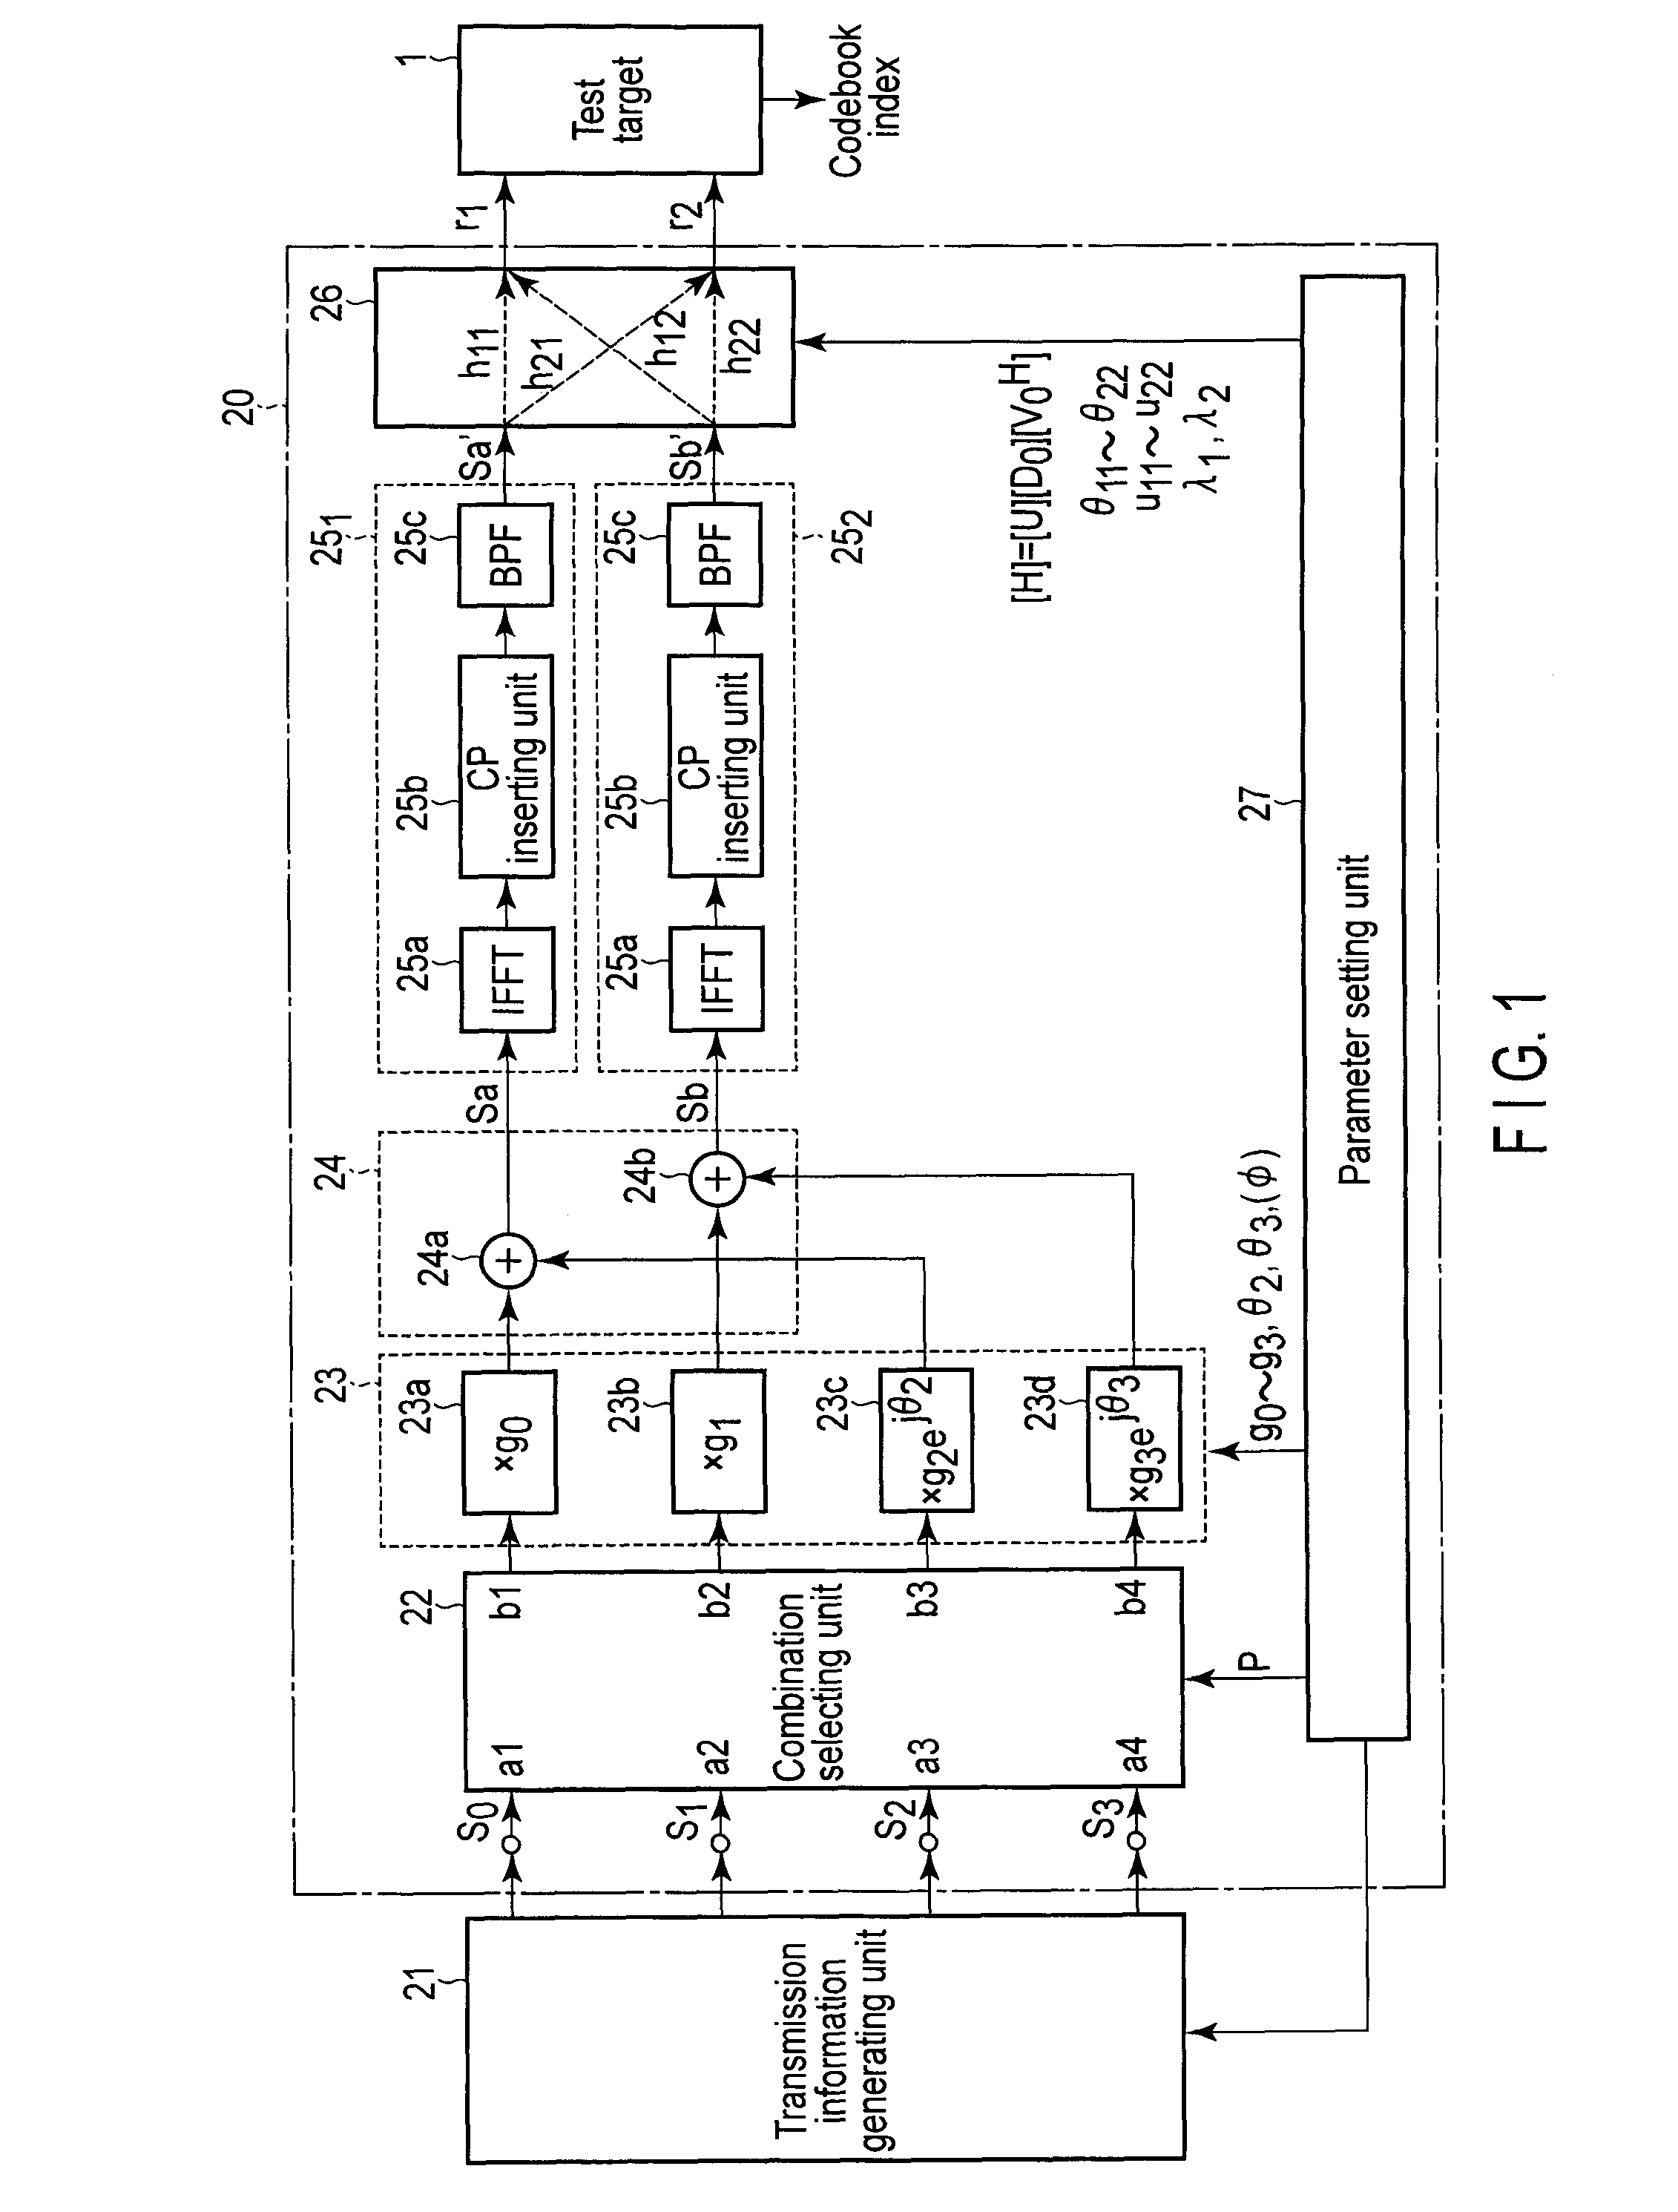 Testing apparatus and method for MIMO systems